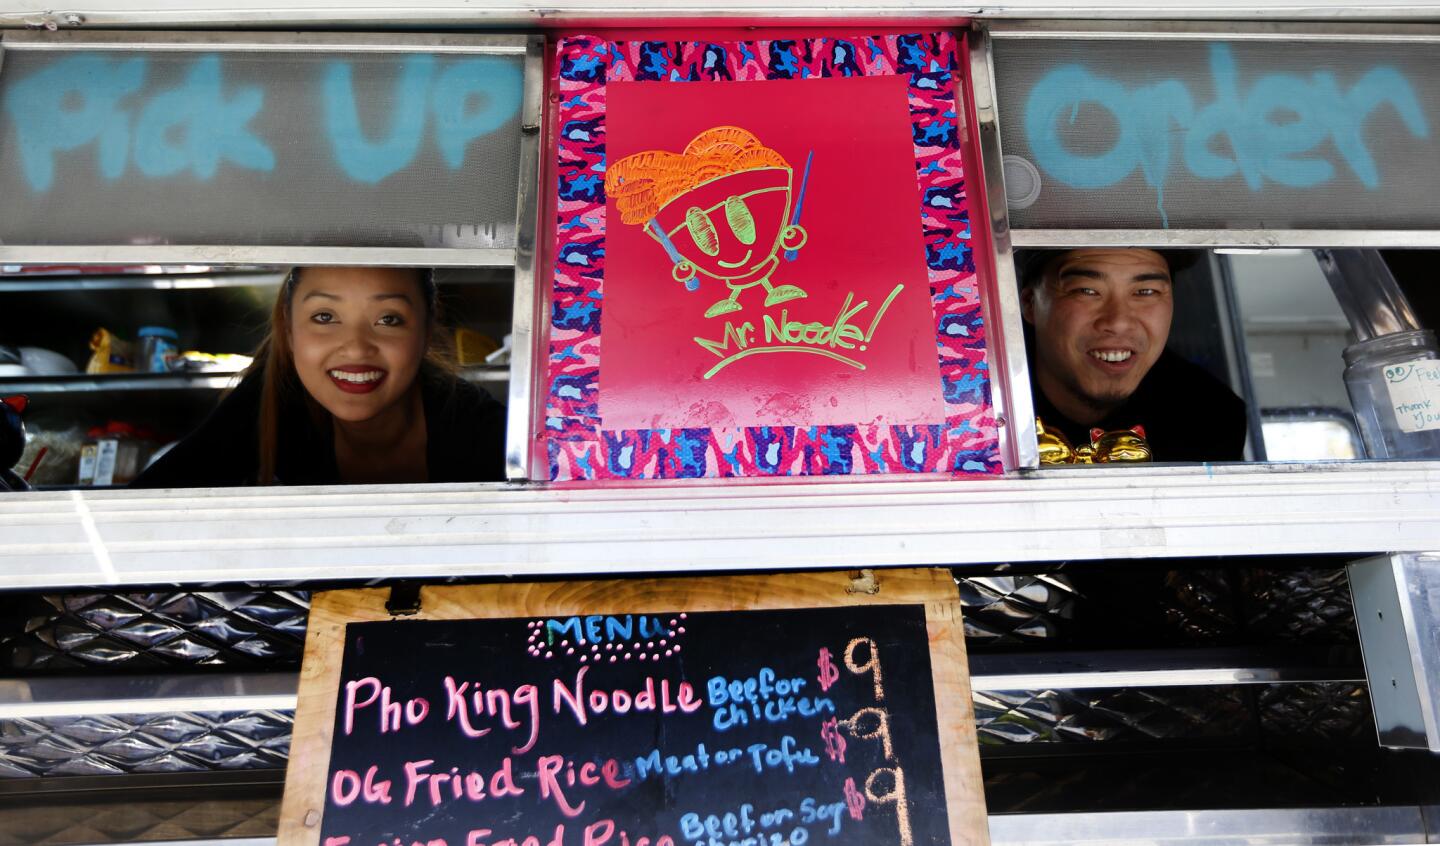 Pho King Awesome food truck